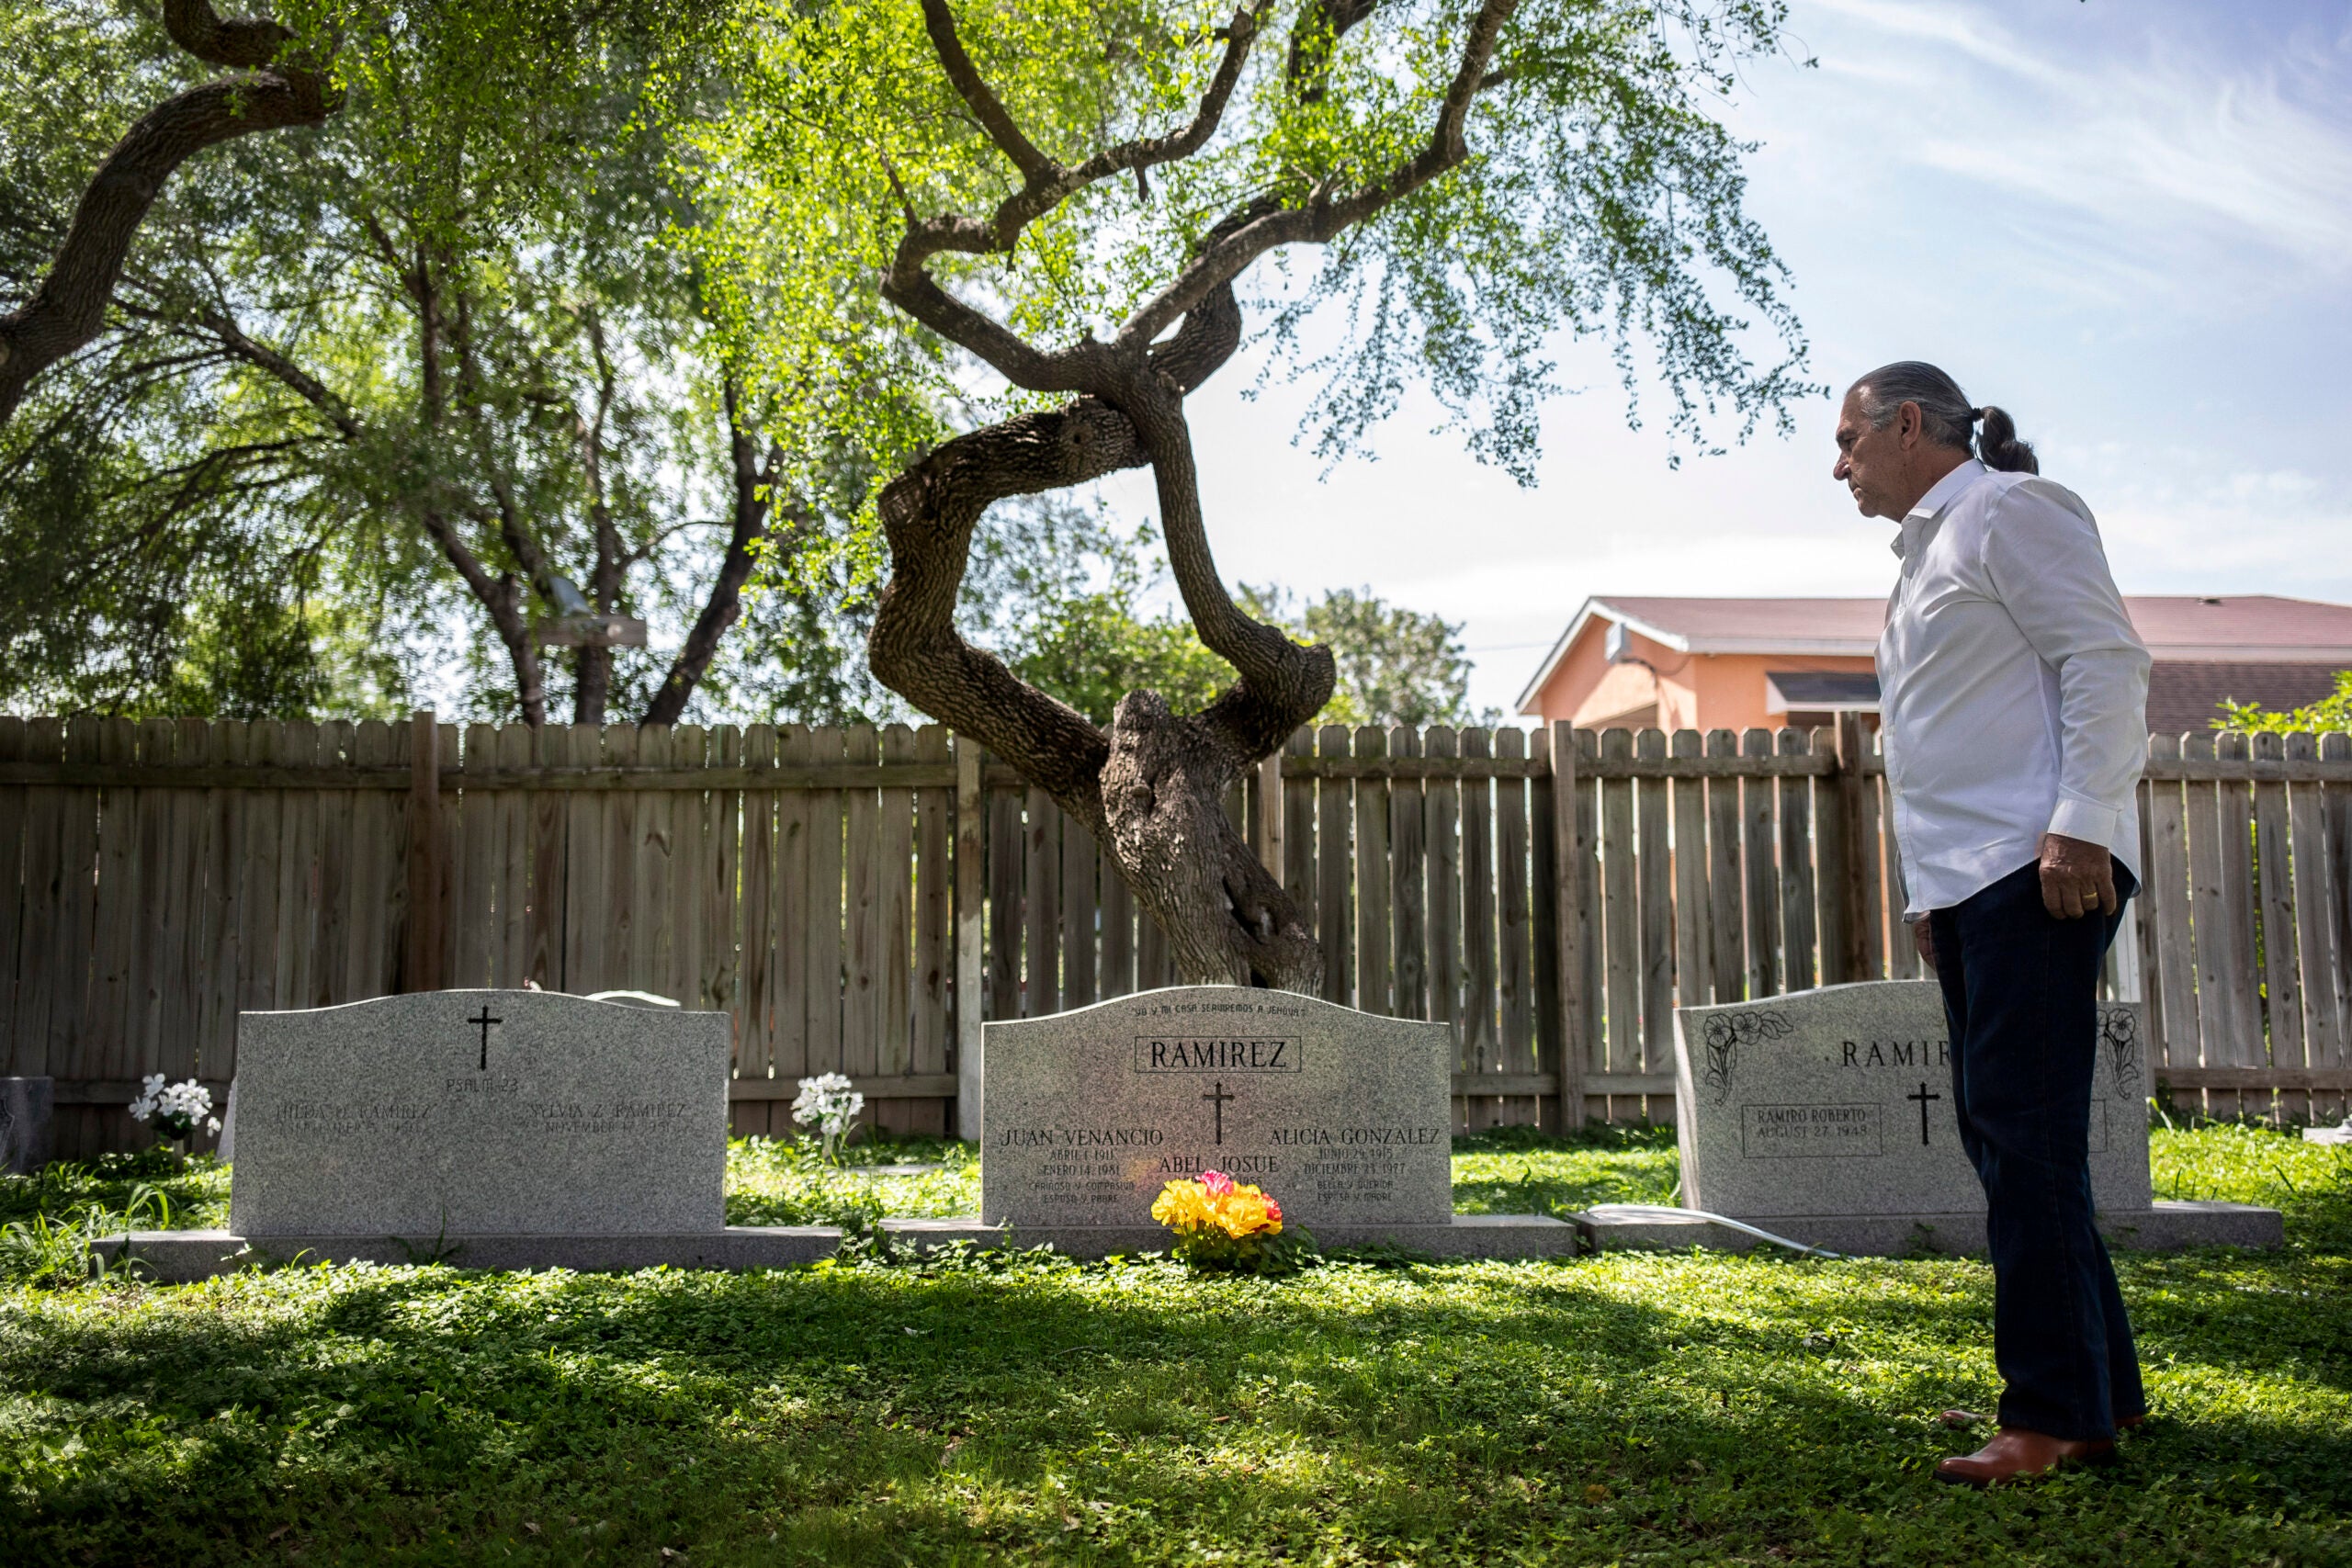 Ramiro Ramirez visits his parents' graves at Jackson Ranch Cemetery in Texas. Trump's wall would make such visits harder.